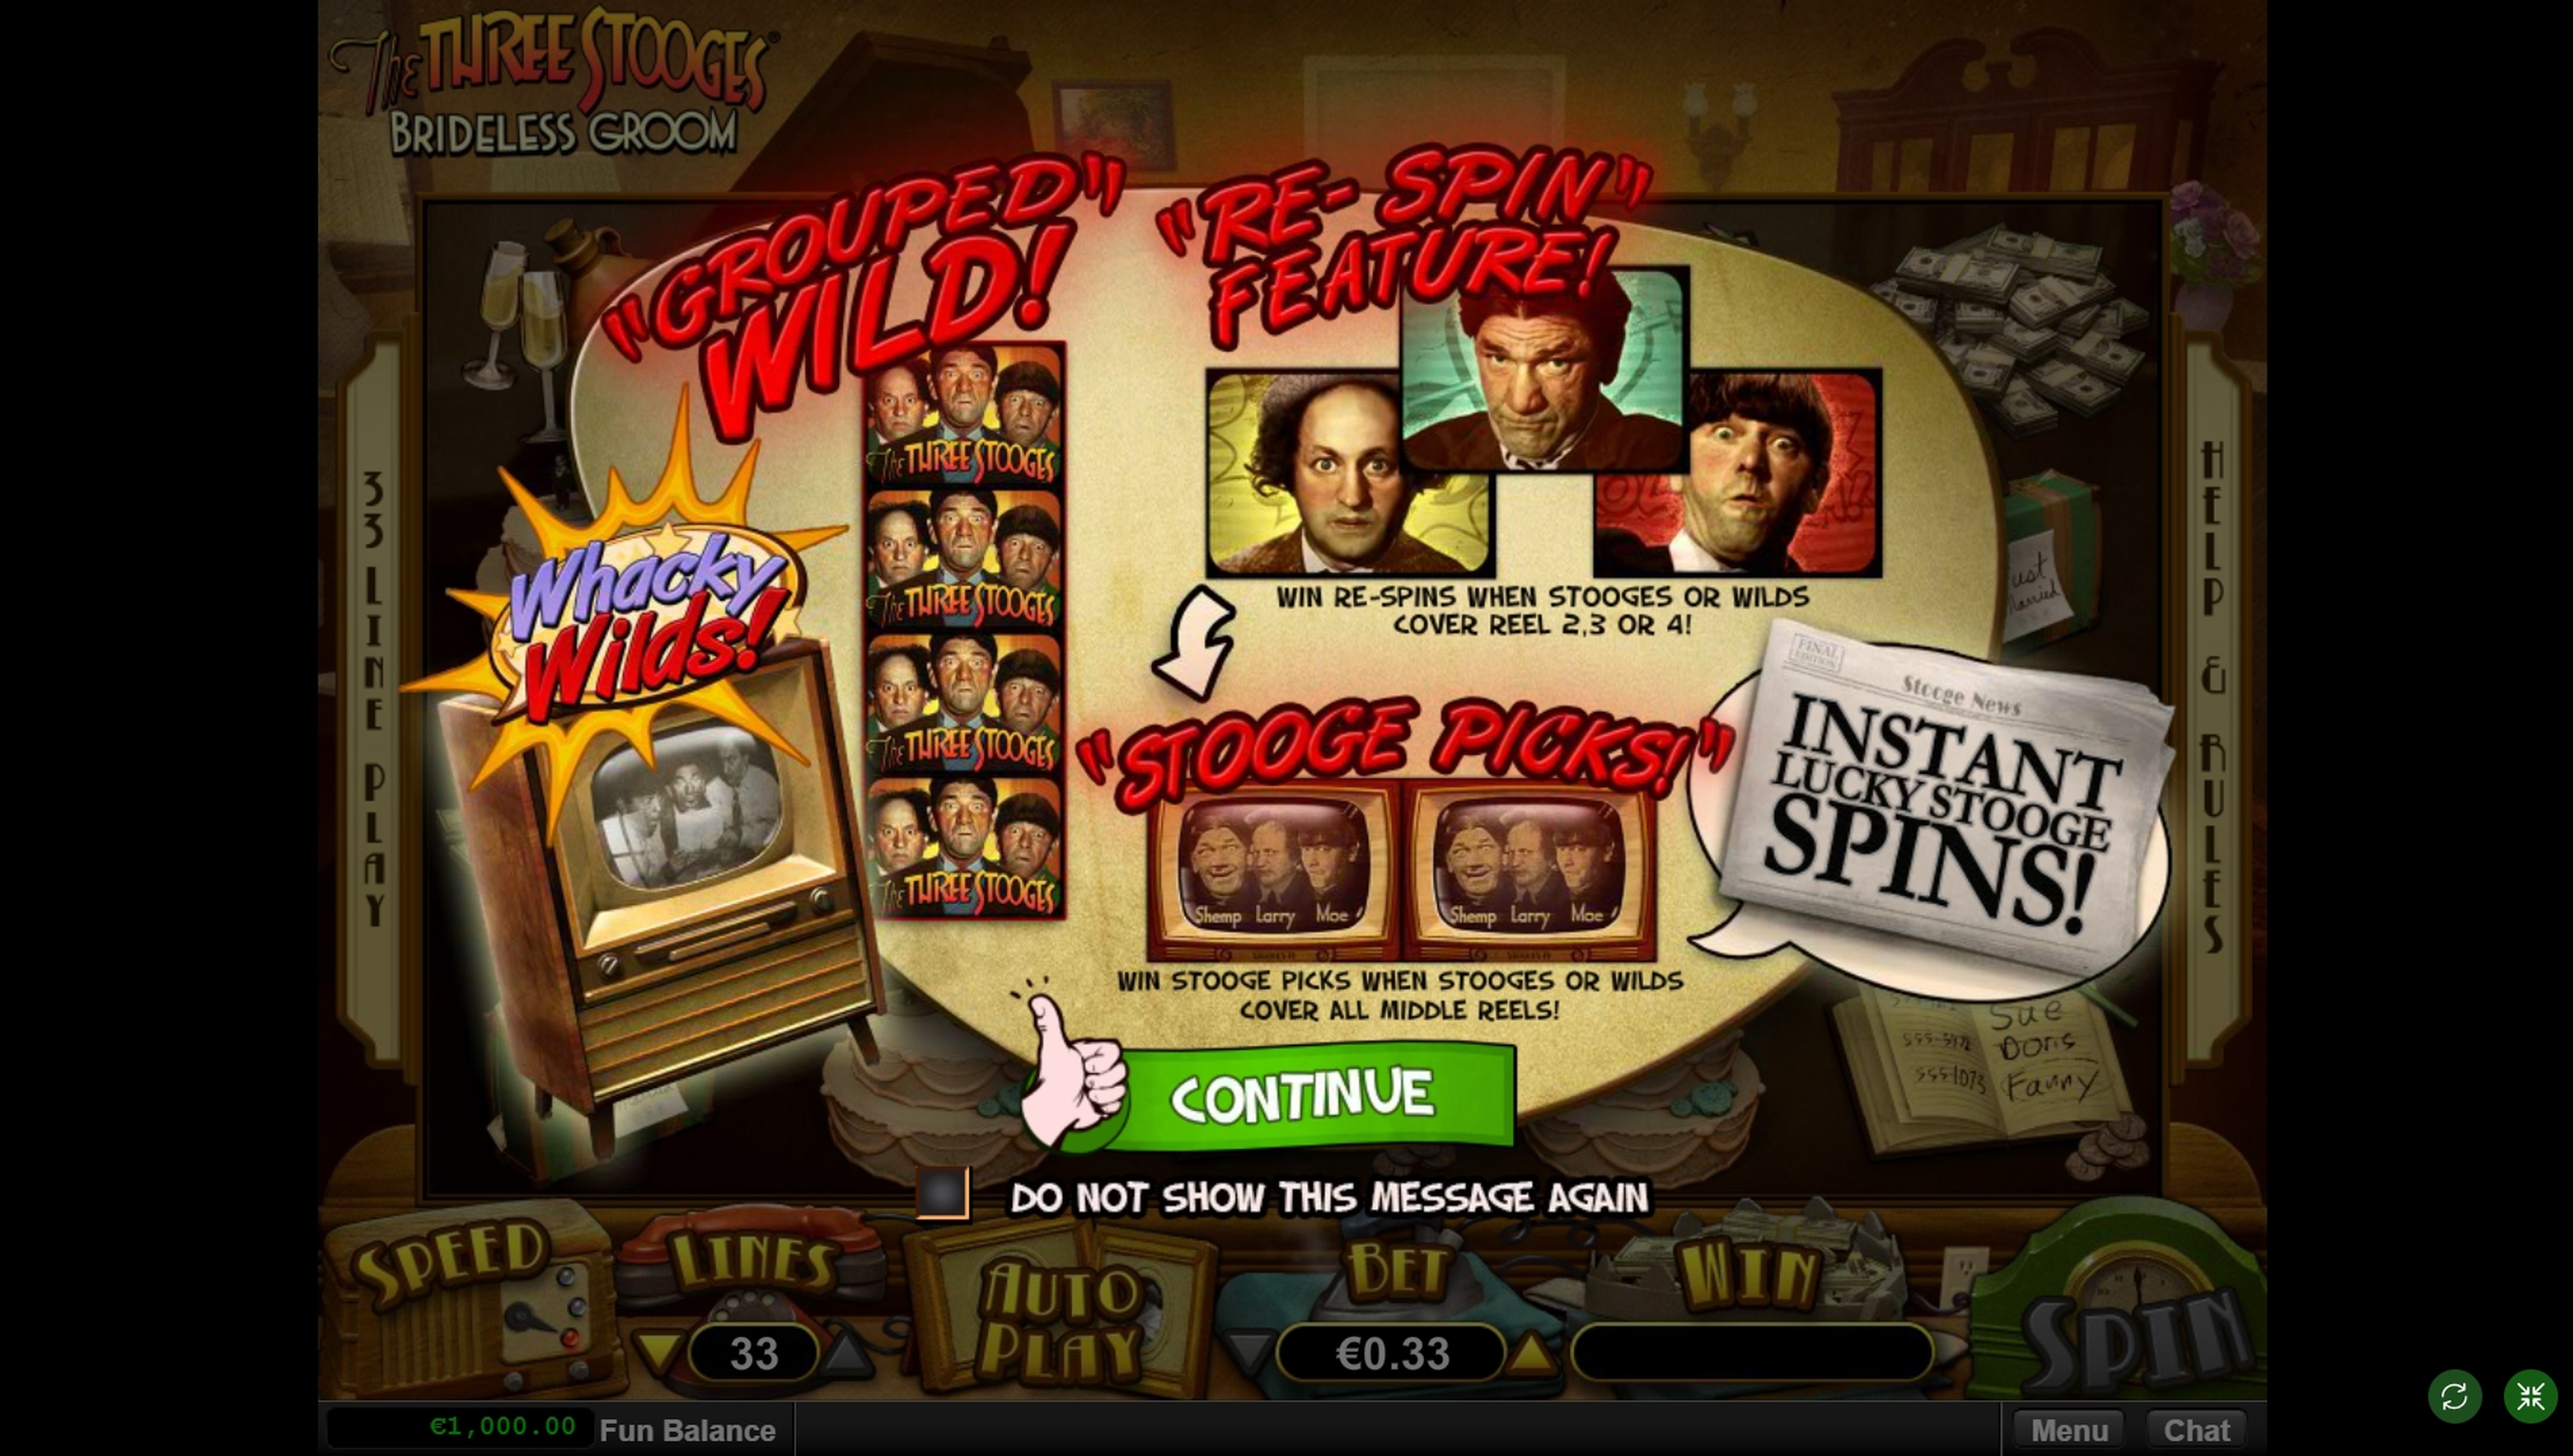 Play The Three Stooges Brideless Groom Free Casino Slot Game by Real Time Gaming